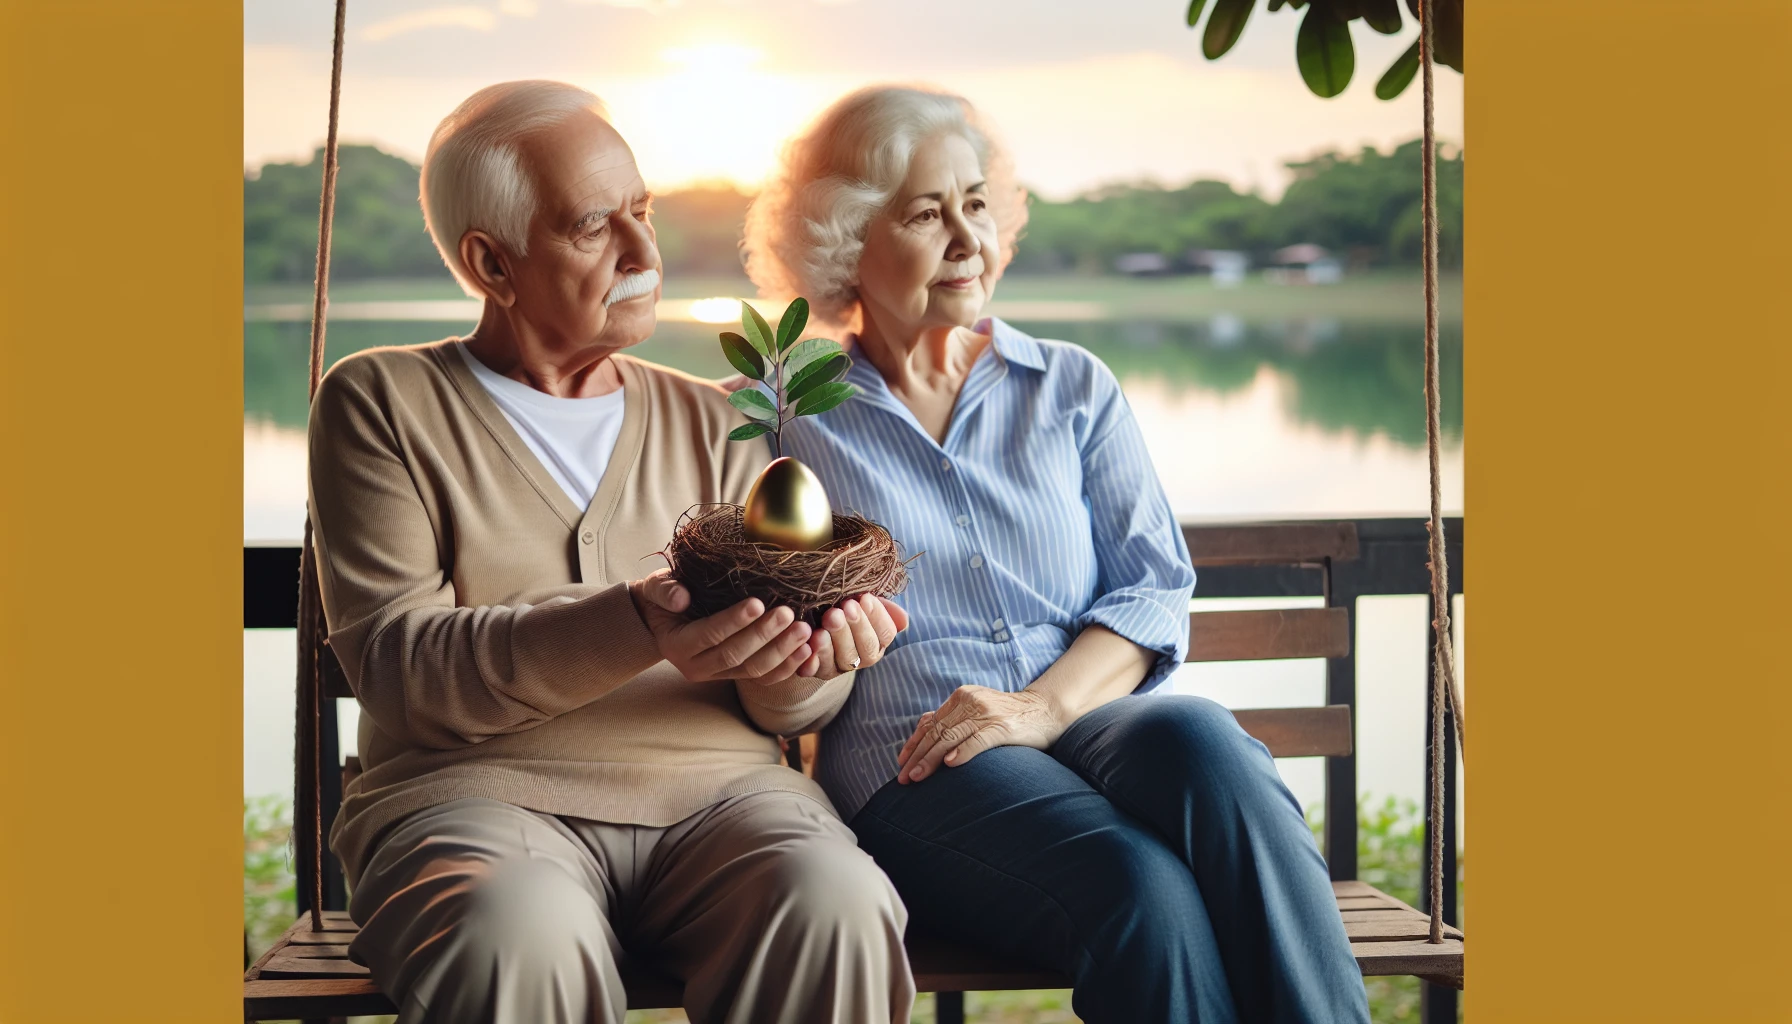 Retirement planning and financial security